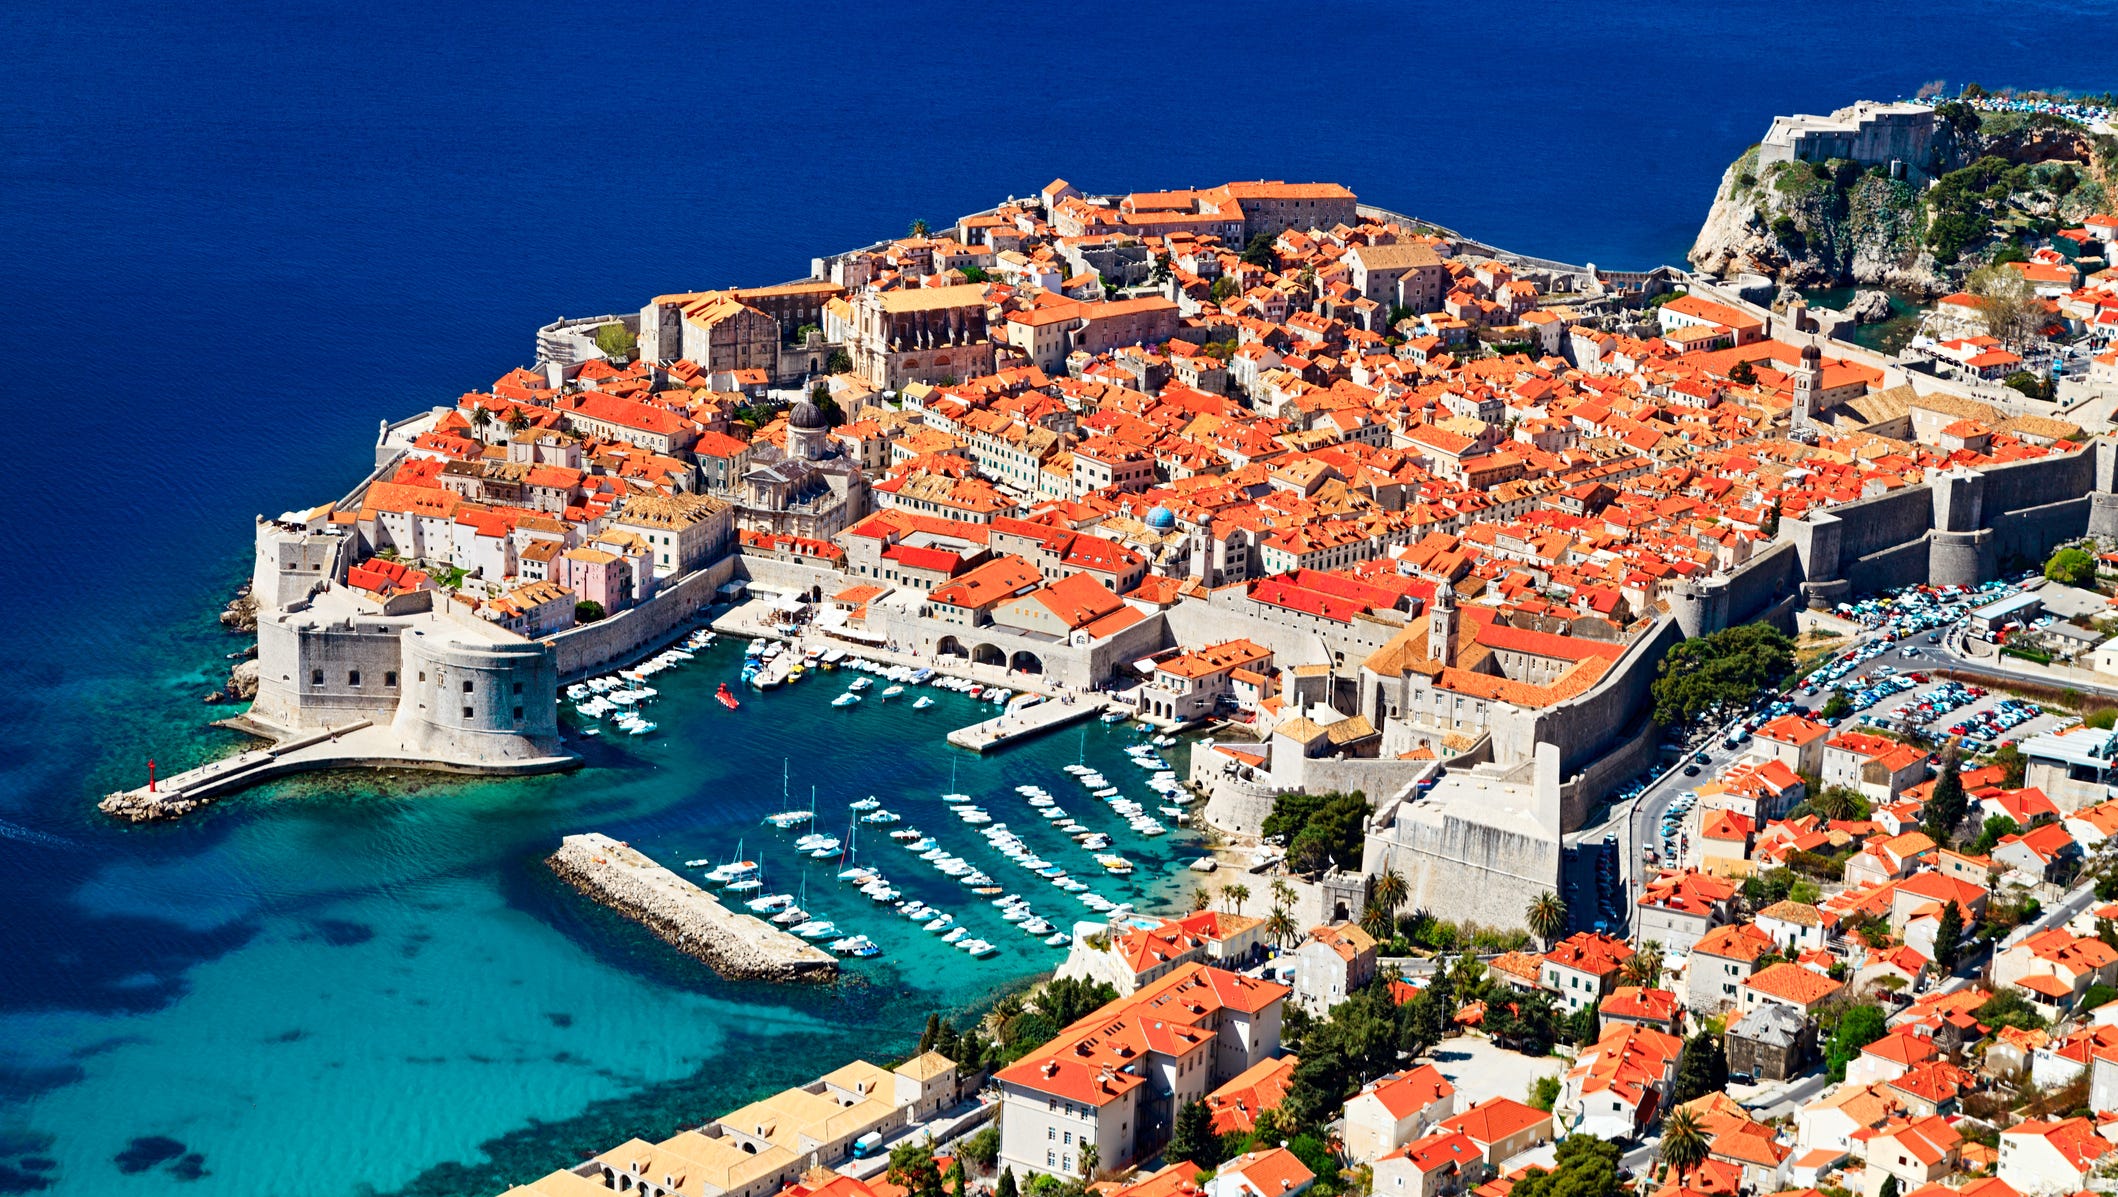 The enchanting walled city of Dubrovnik